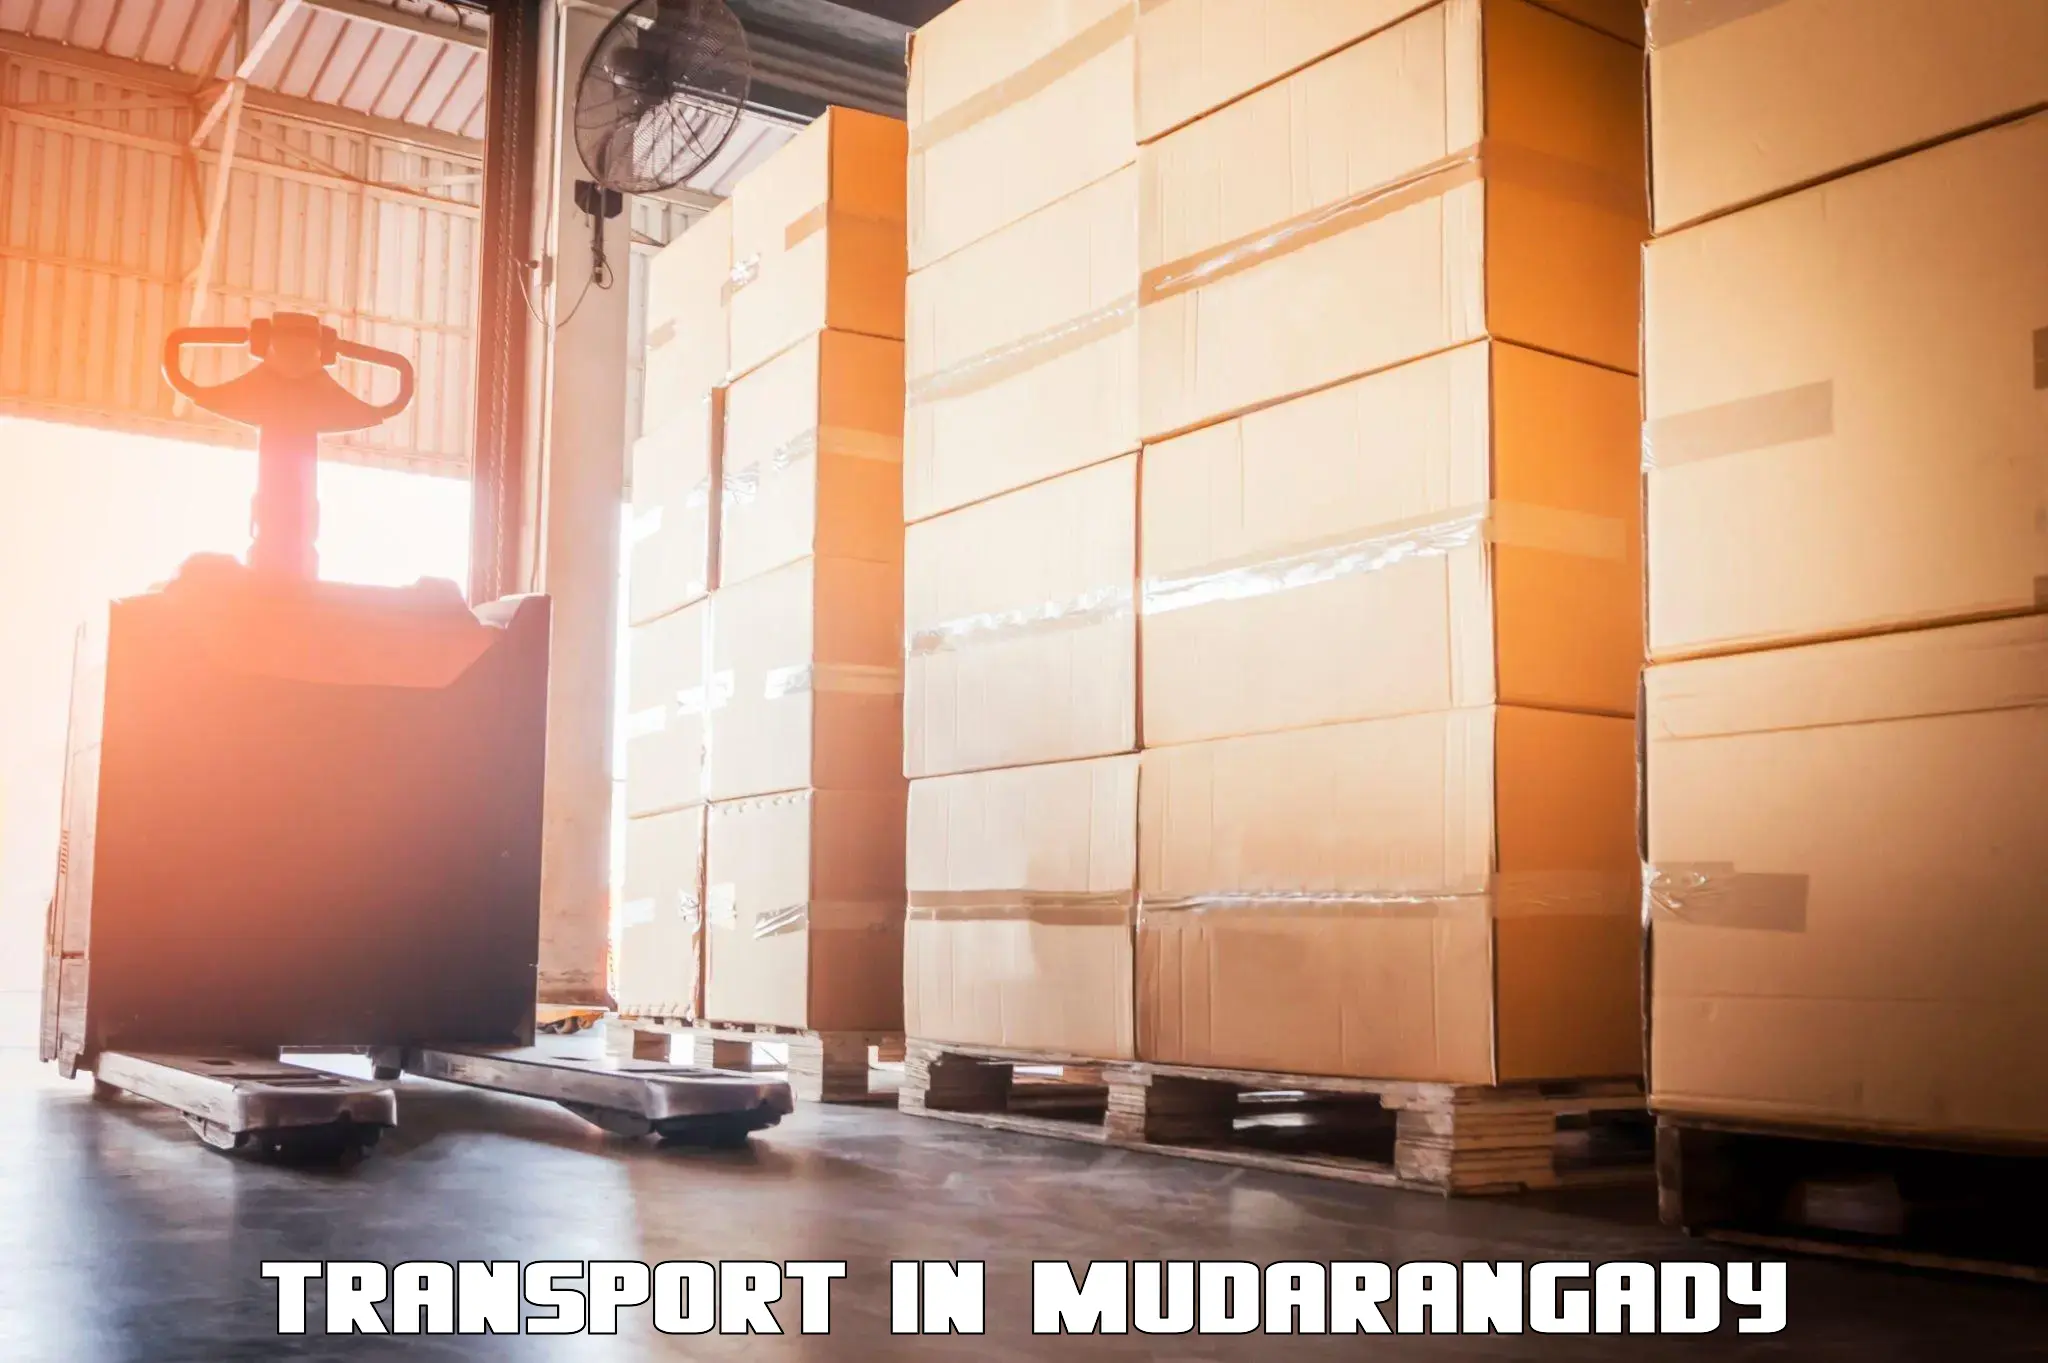 Parcel transport services in Mudarangady